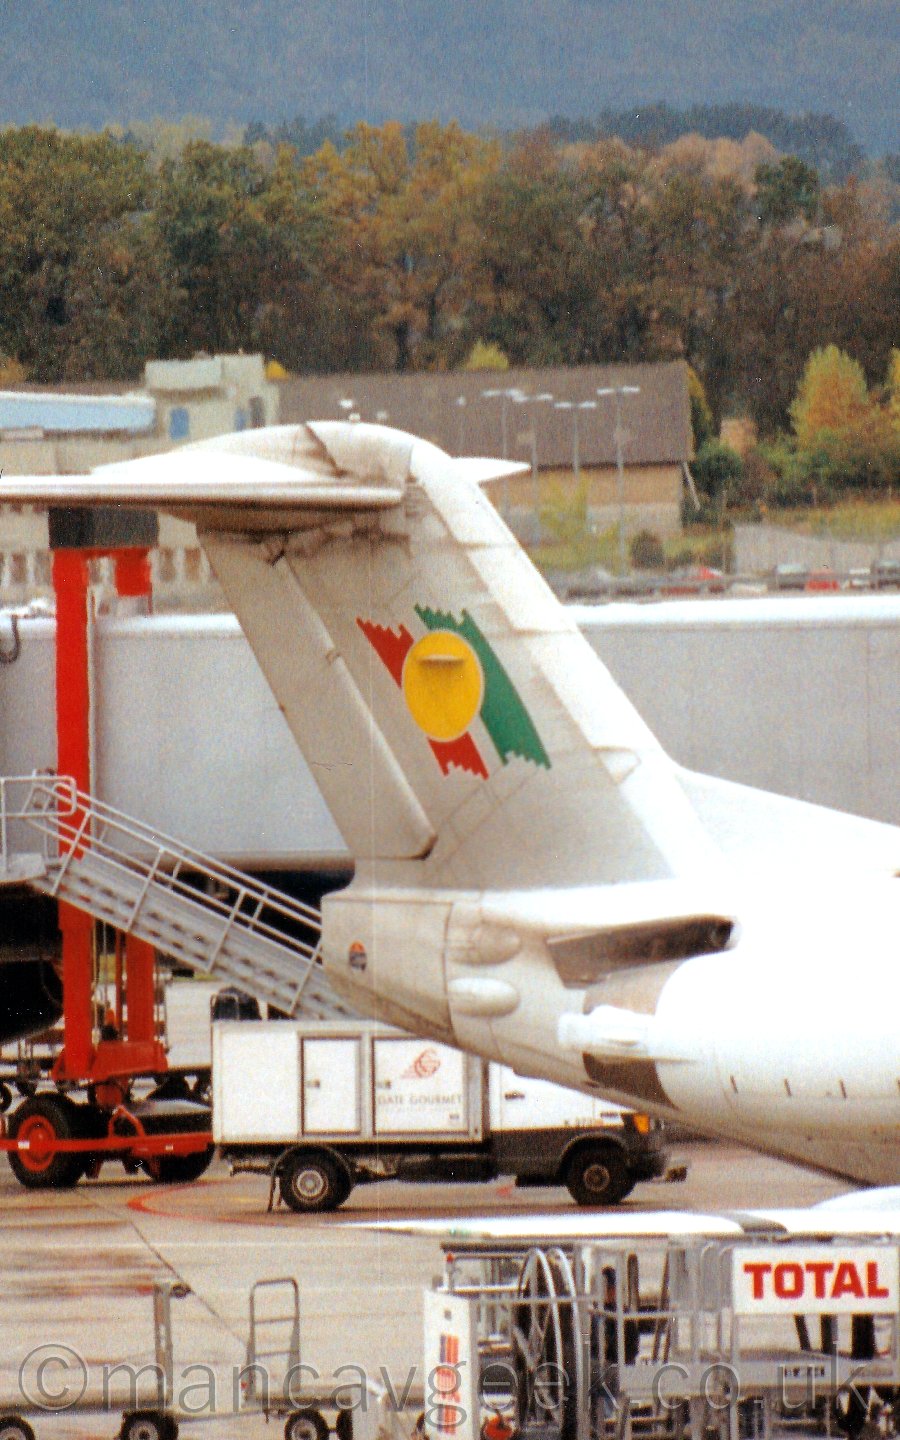 Close up of the rear fuselage and tail of a twin engined jet airliner parked facing to the right. The plane's body is white, while the tail is a light grey, with short red and greendiagonal bands in the middle, overlaid with a yellow circle. In the backgrouund, a white vehicle can be seen under the tail, while an airbridge stretches all the way across the middle of the frame. In the distance, a brown building stands in front of a load of trees, with a tree-clad hill climbing to the top of the frame.